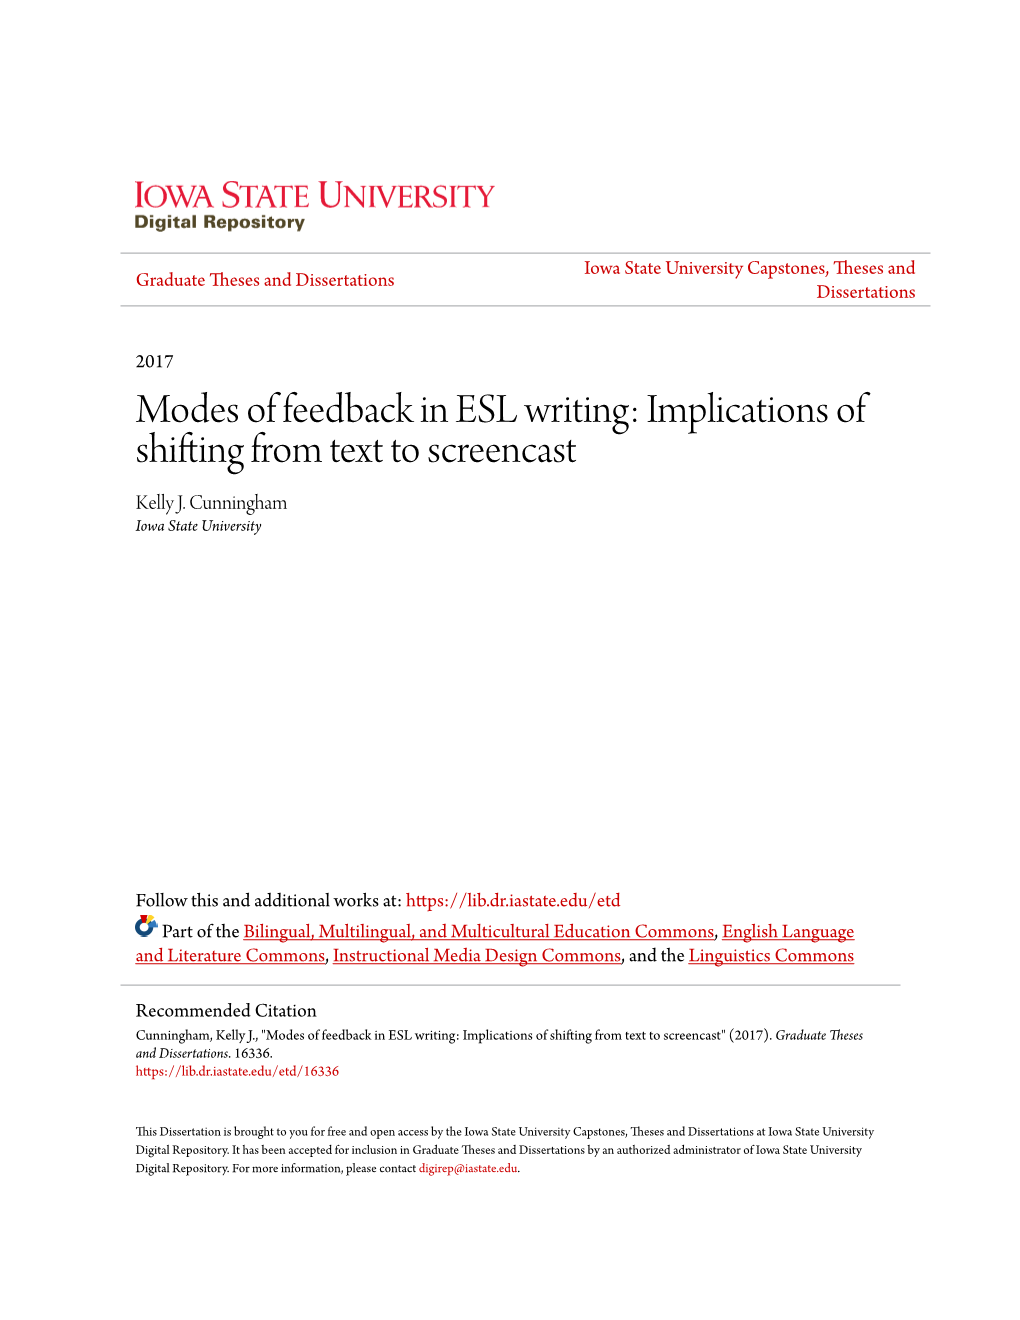 Modes of Feedback in ESL Writing: Implications of Shifting from Text to Screencast Kelly J